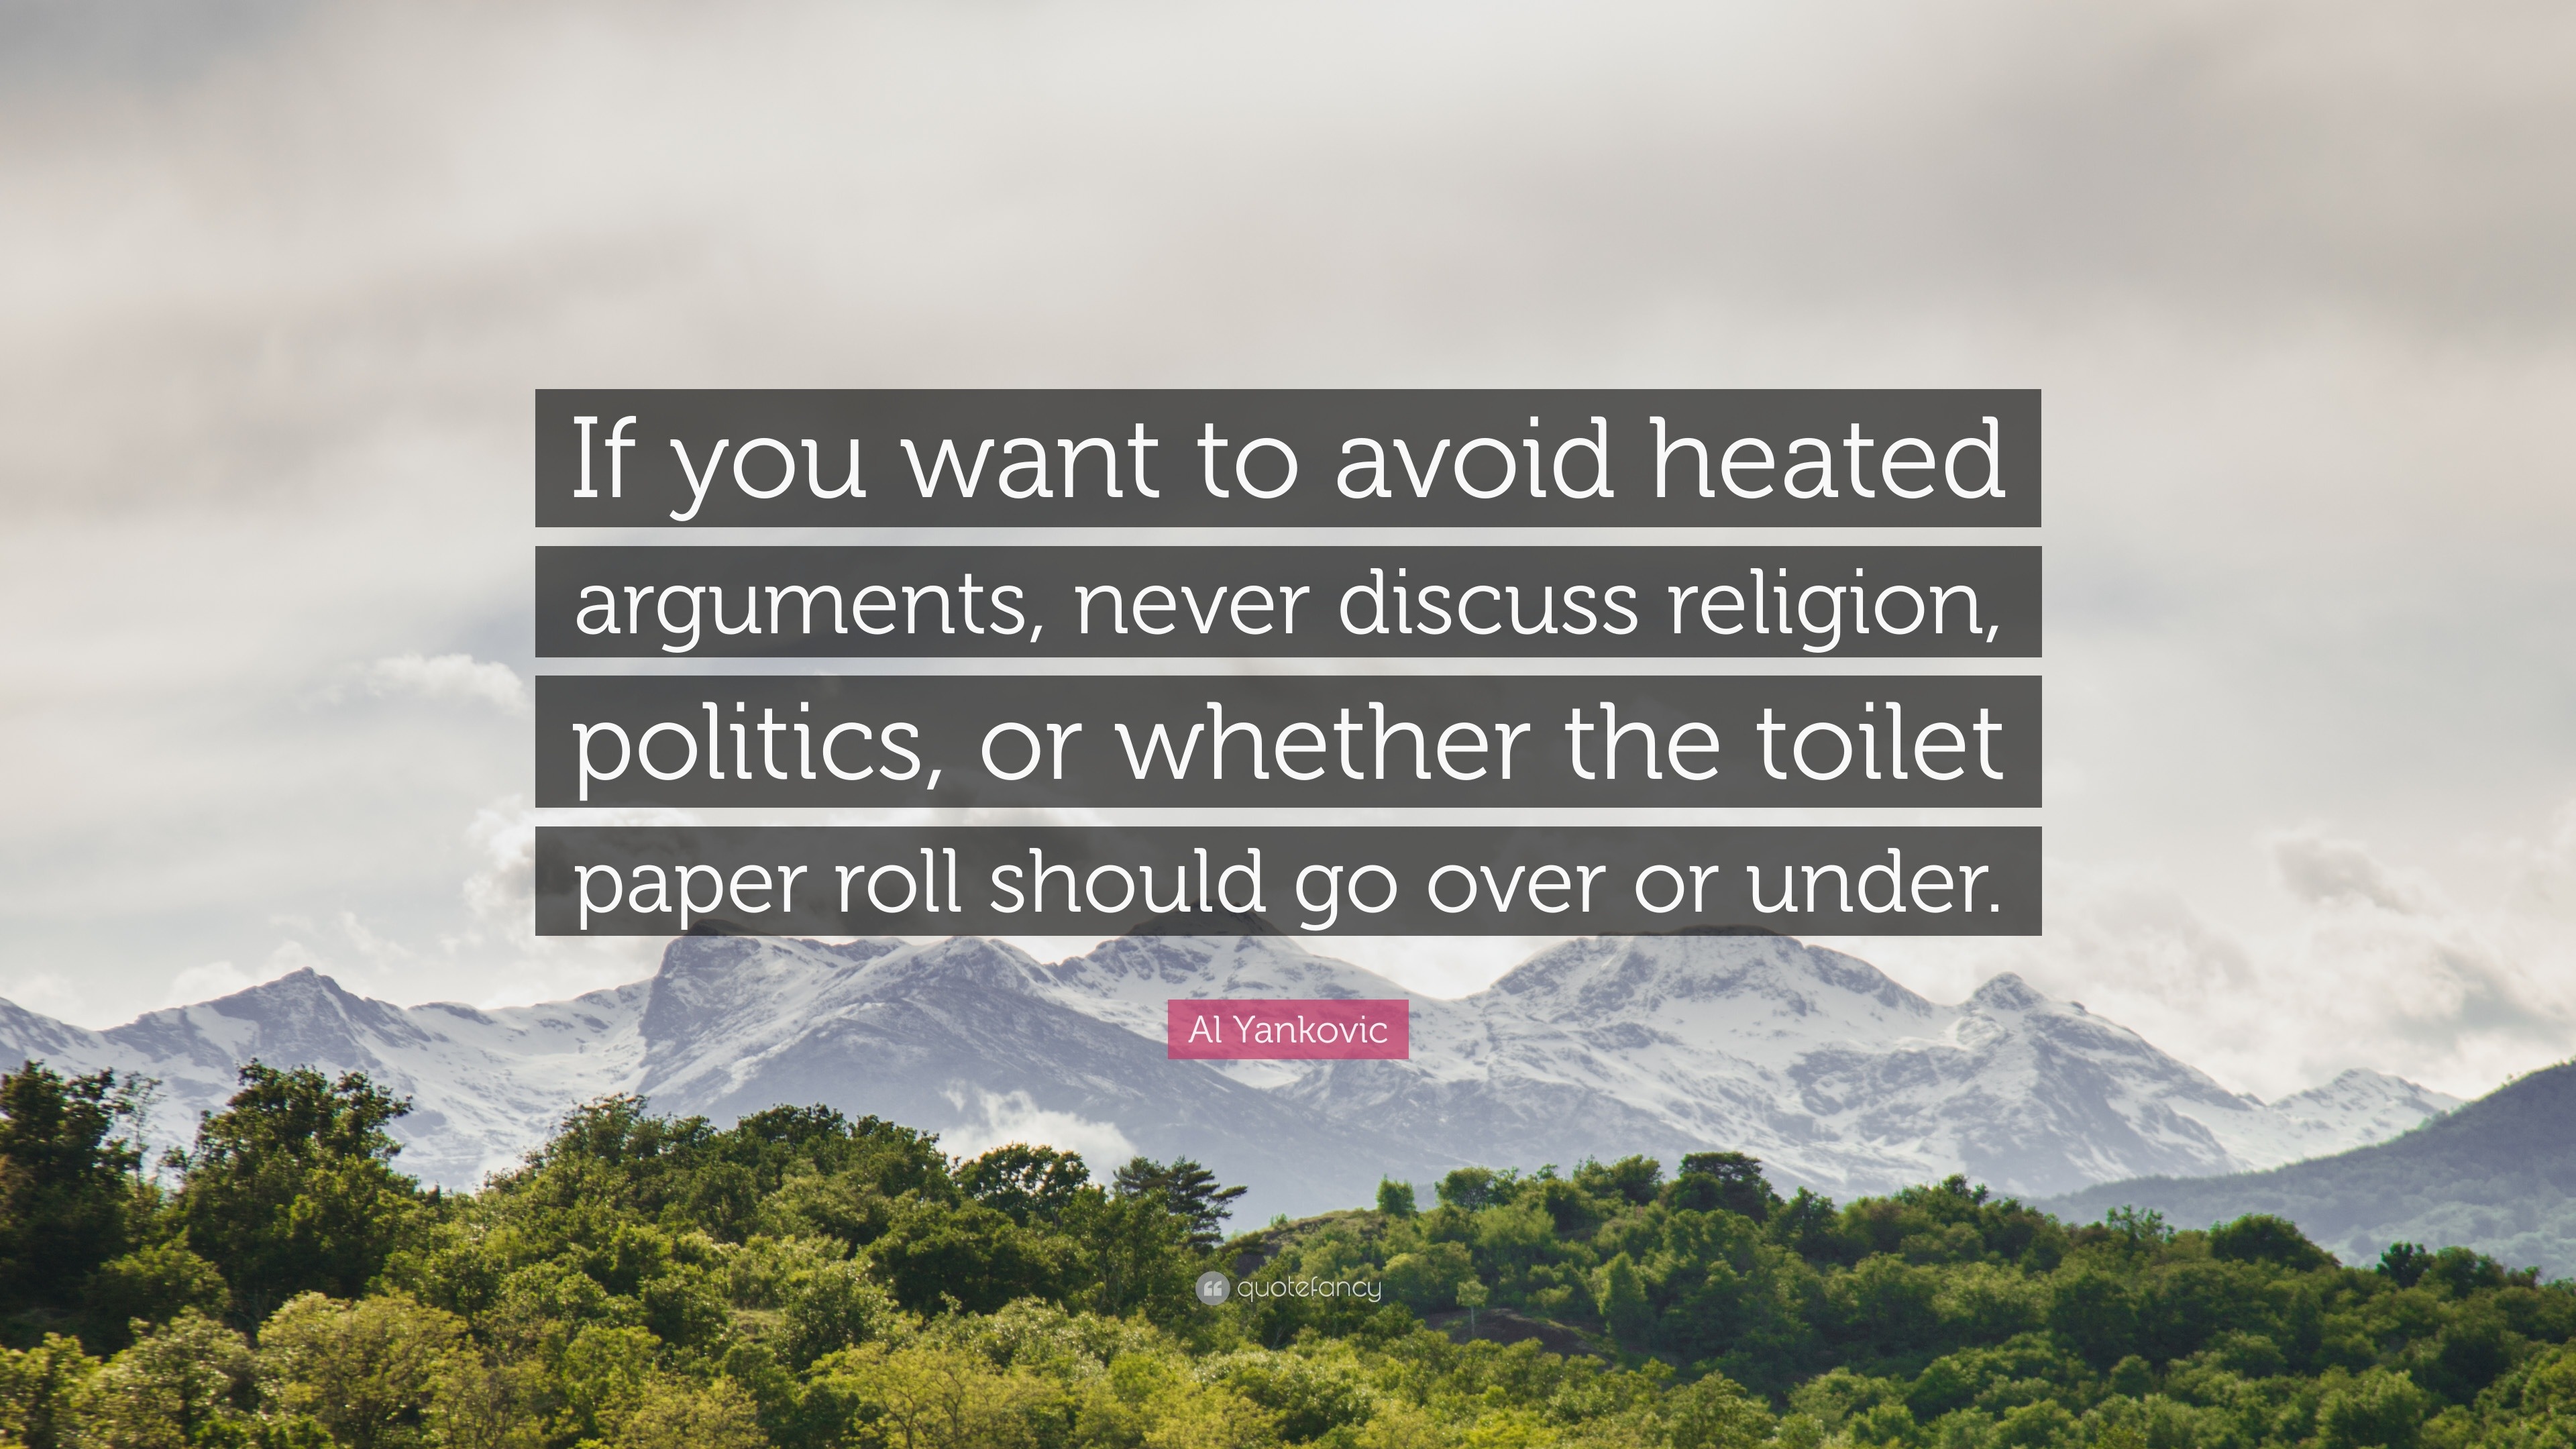 Al Yankovic Quote If You Want To Avoid Heated Arguments Never Discuss Religion Politics Or Whether The Toilet Paper Roll Should Go Over